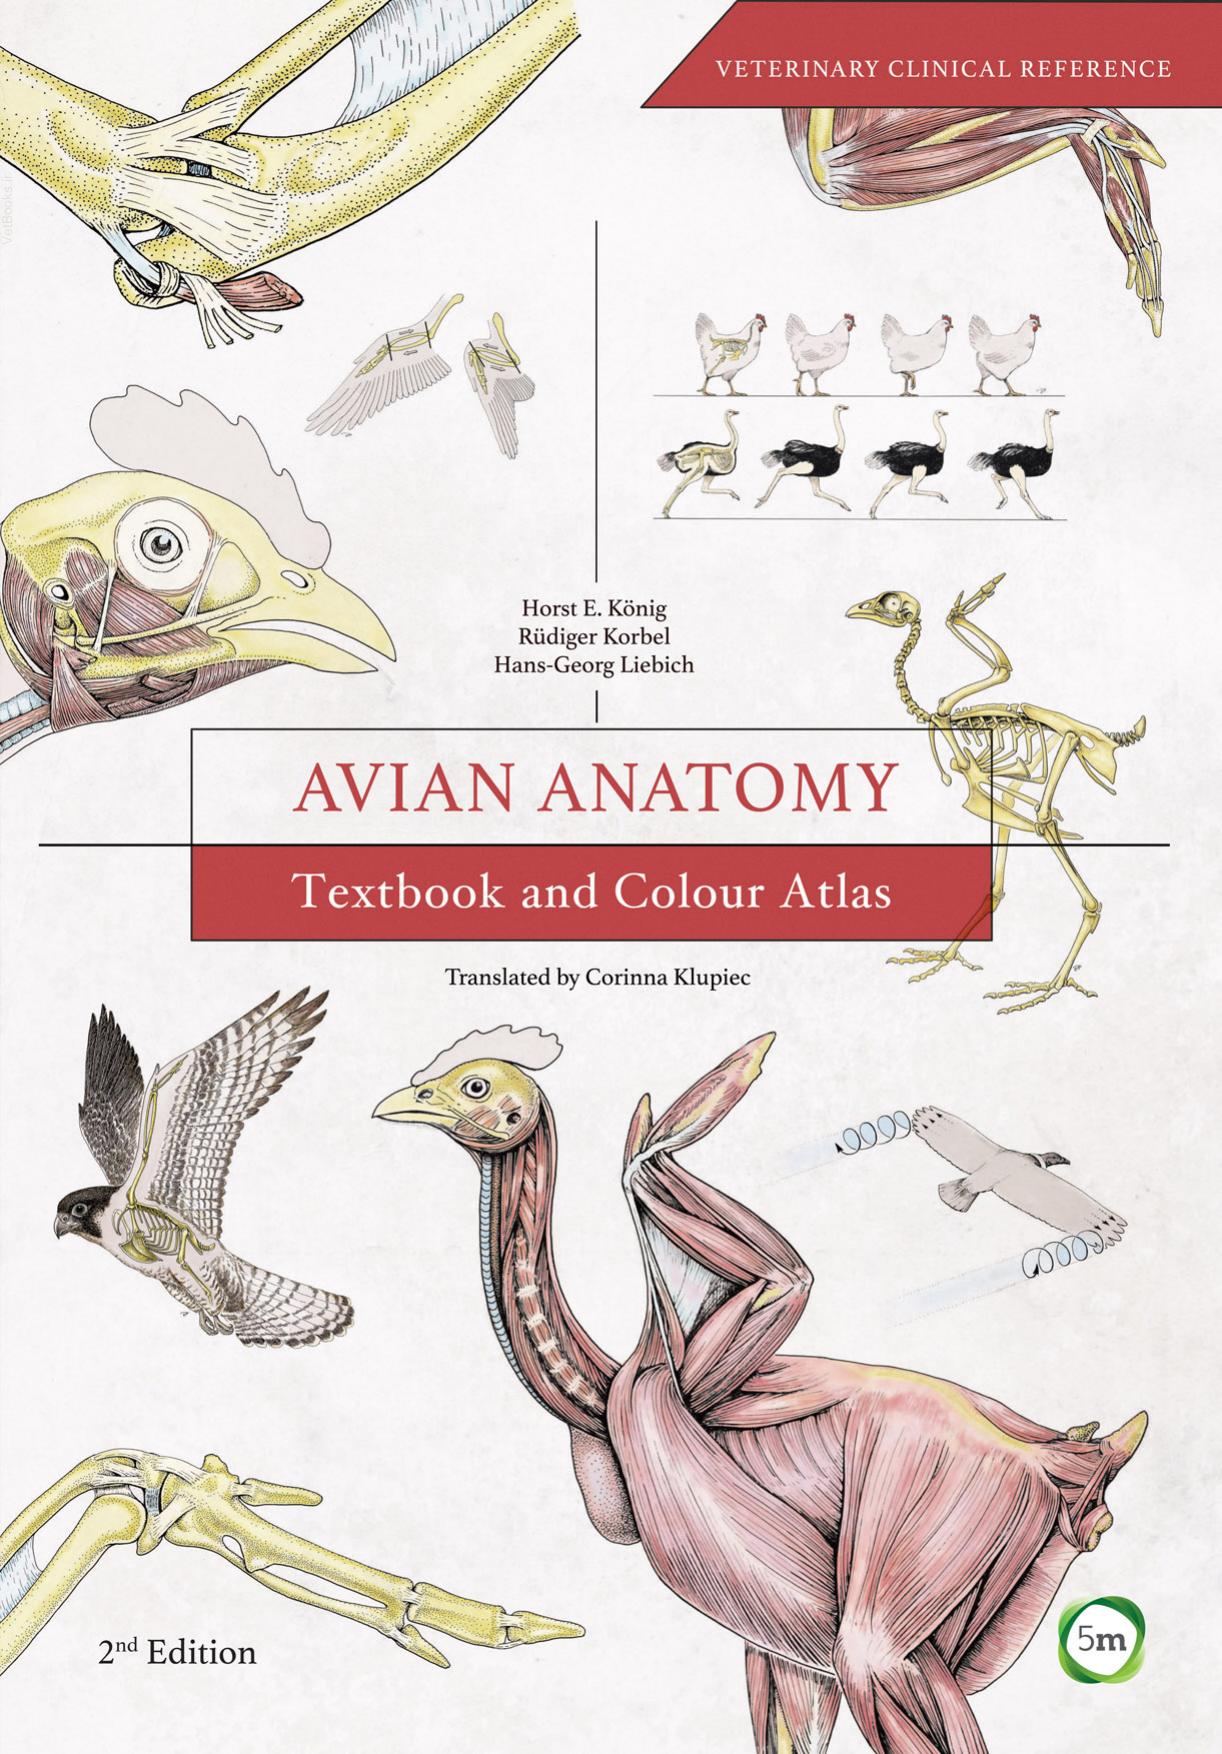 Avian Anatomy: Textbook and Colour Atlas, 2nd Edition